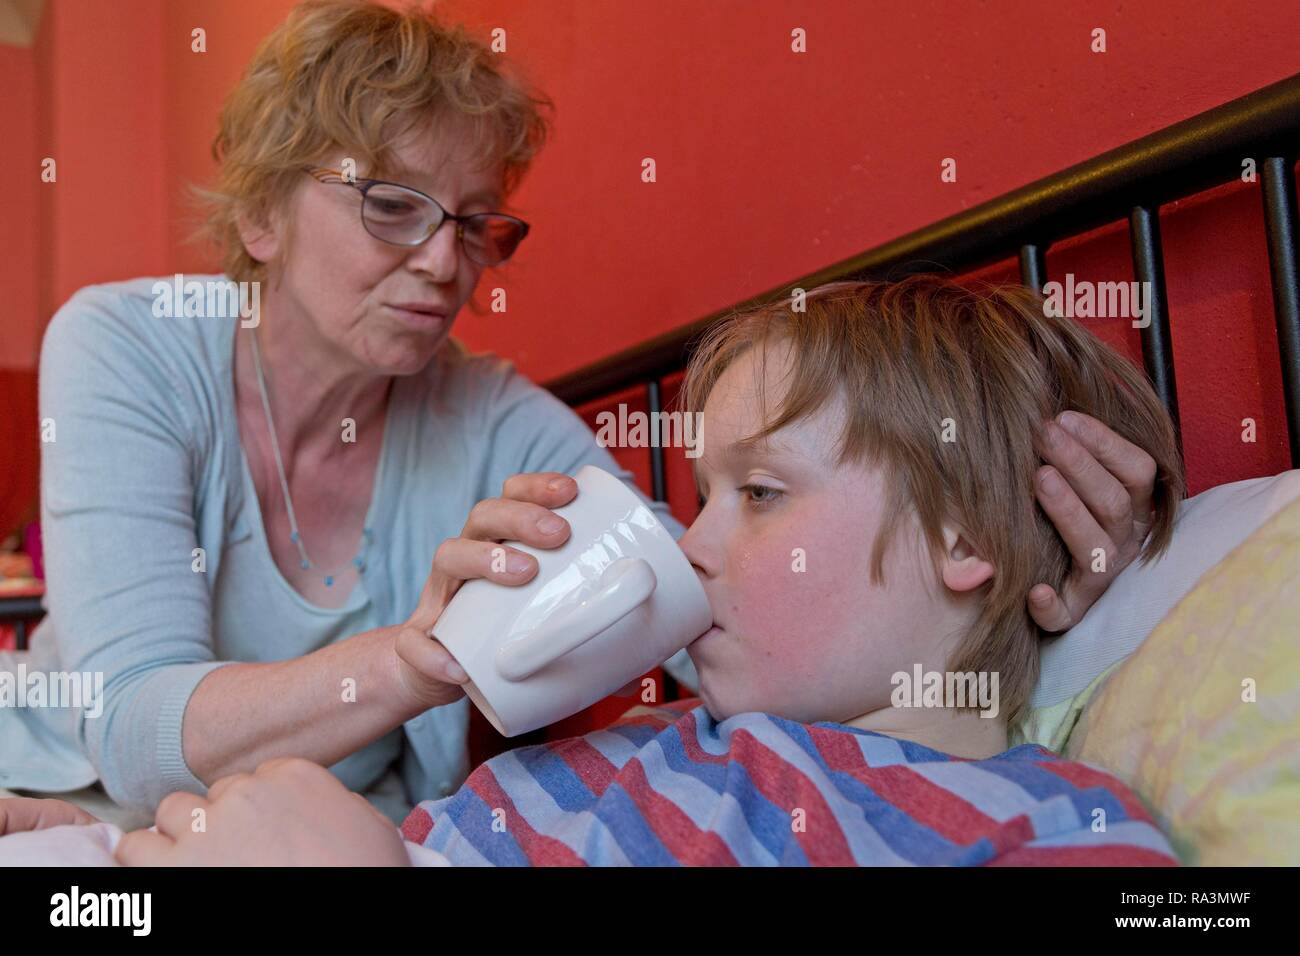 Mother Caring For Sick Child High Resolution Stock Photography And